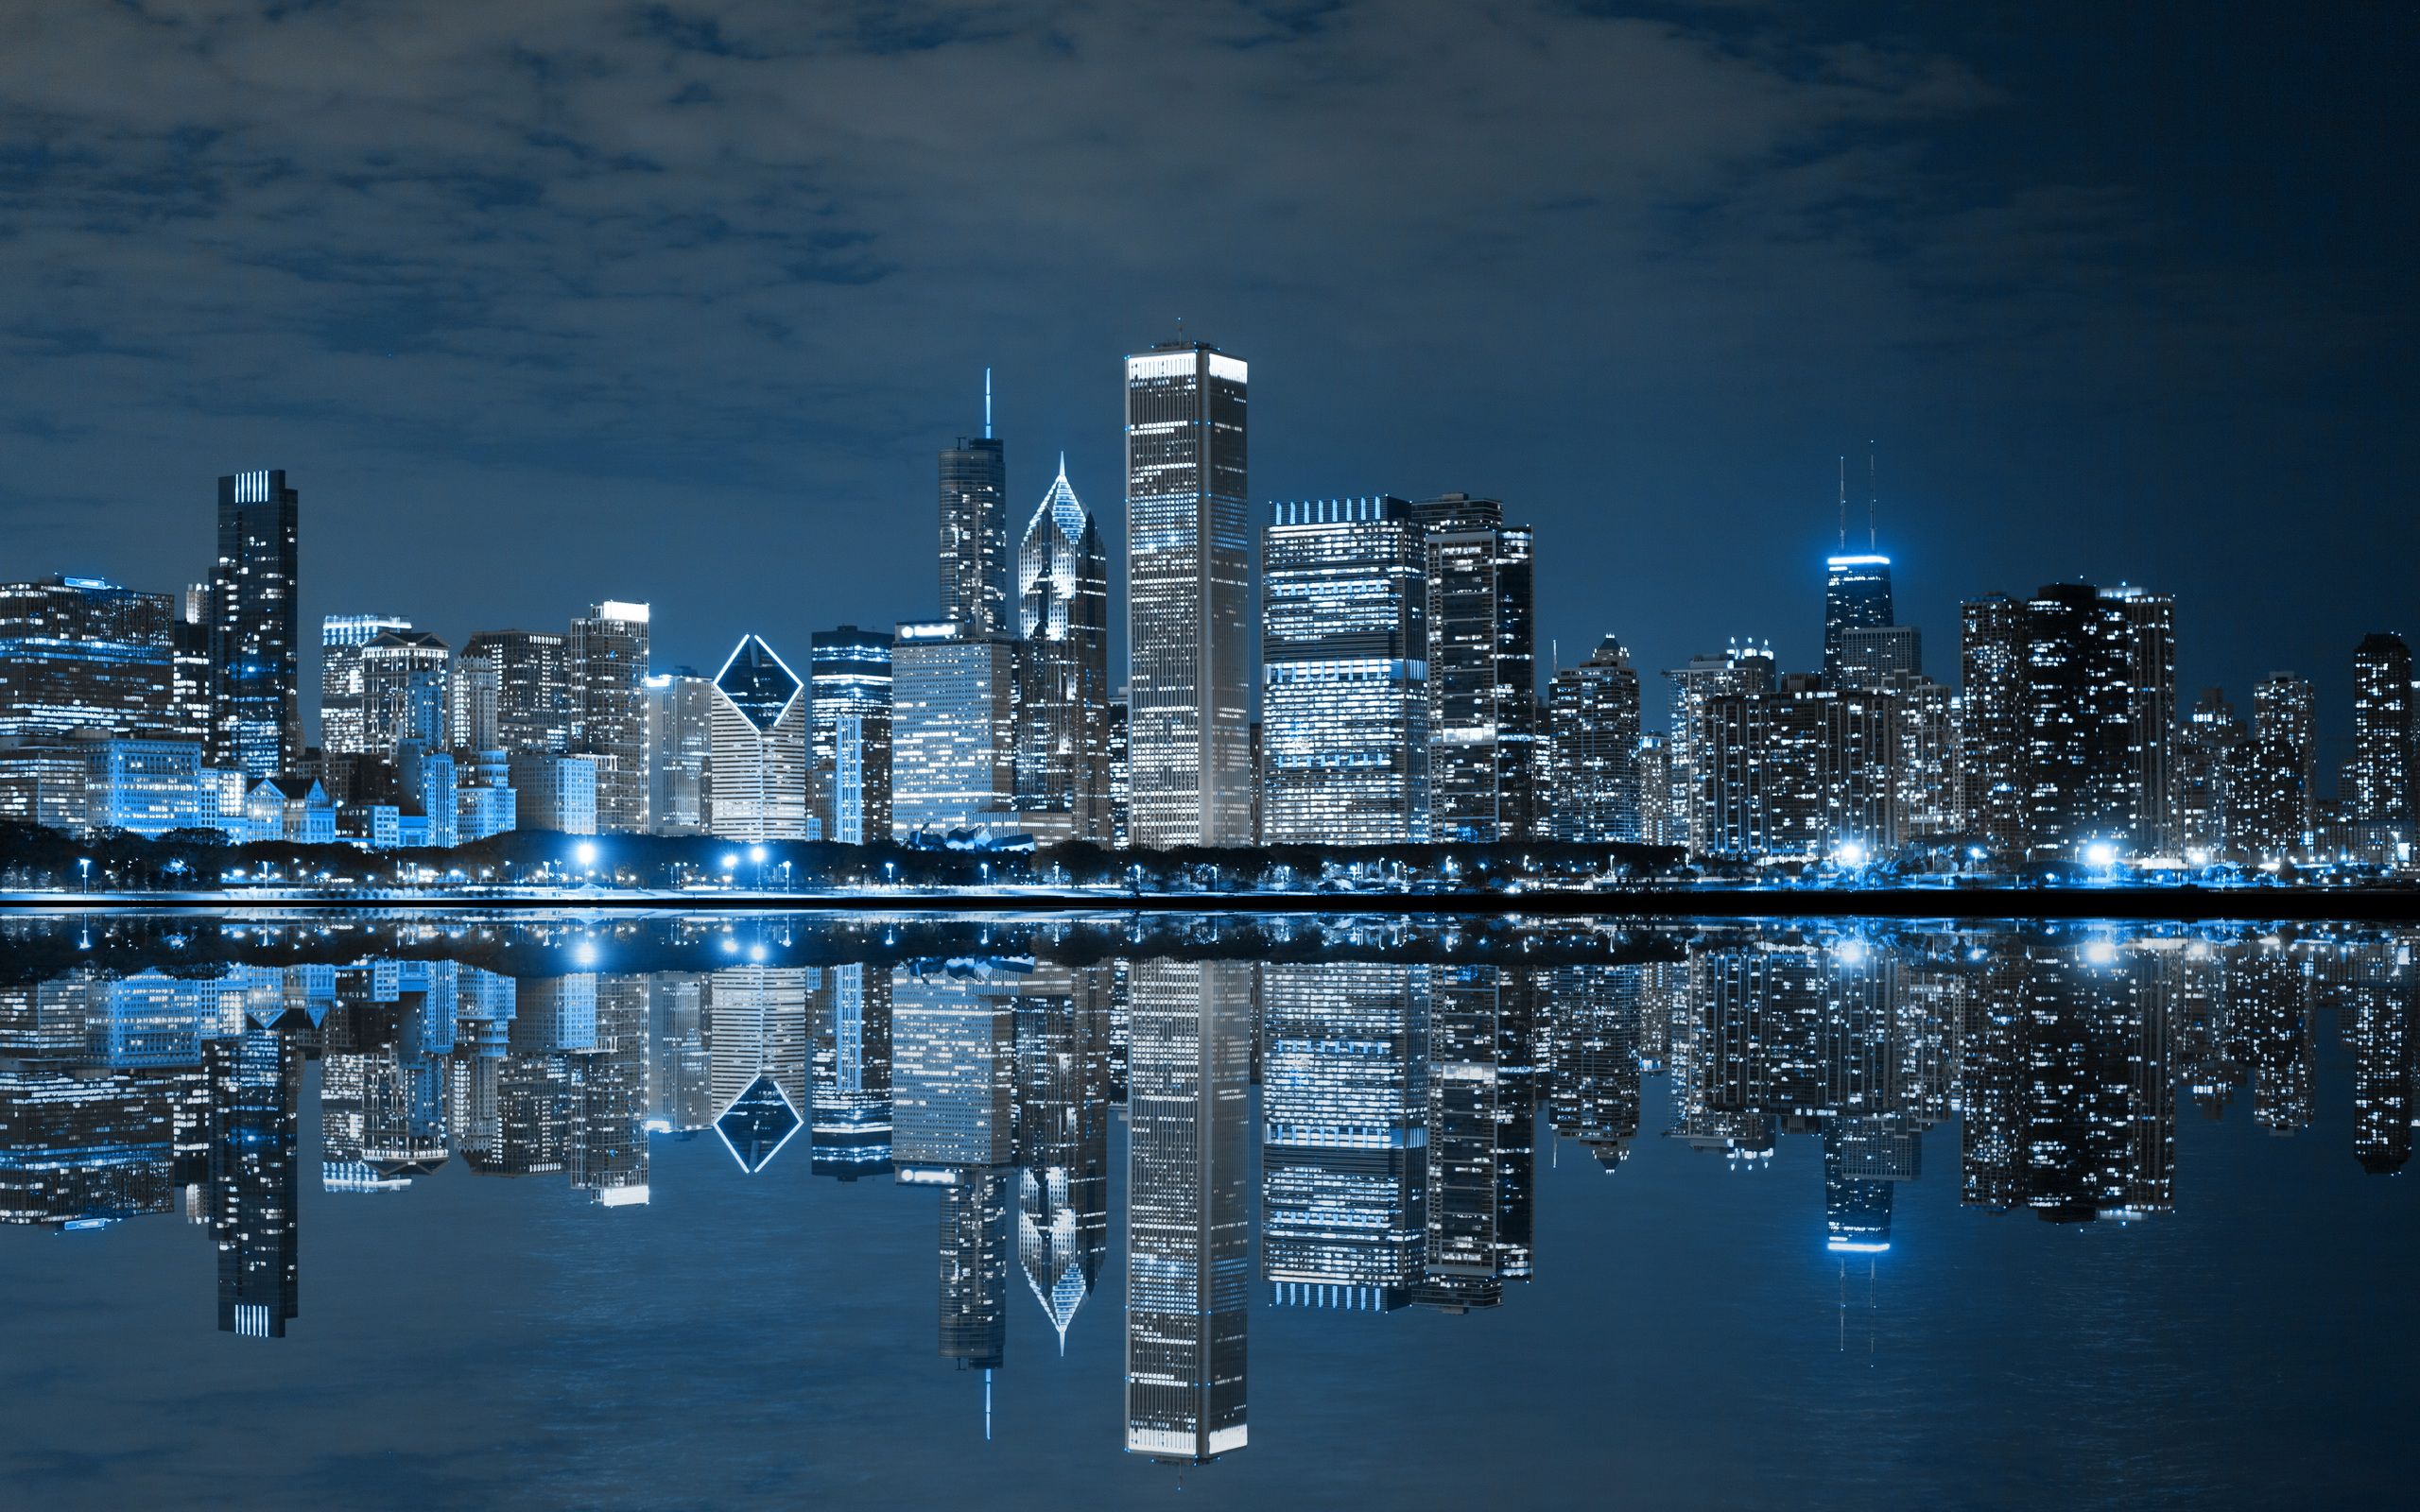 Chicago Wallpapers